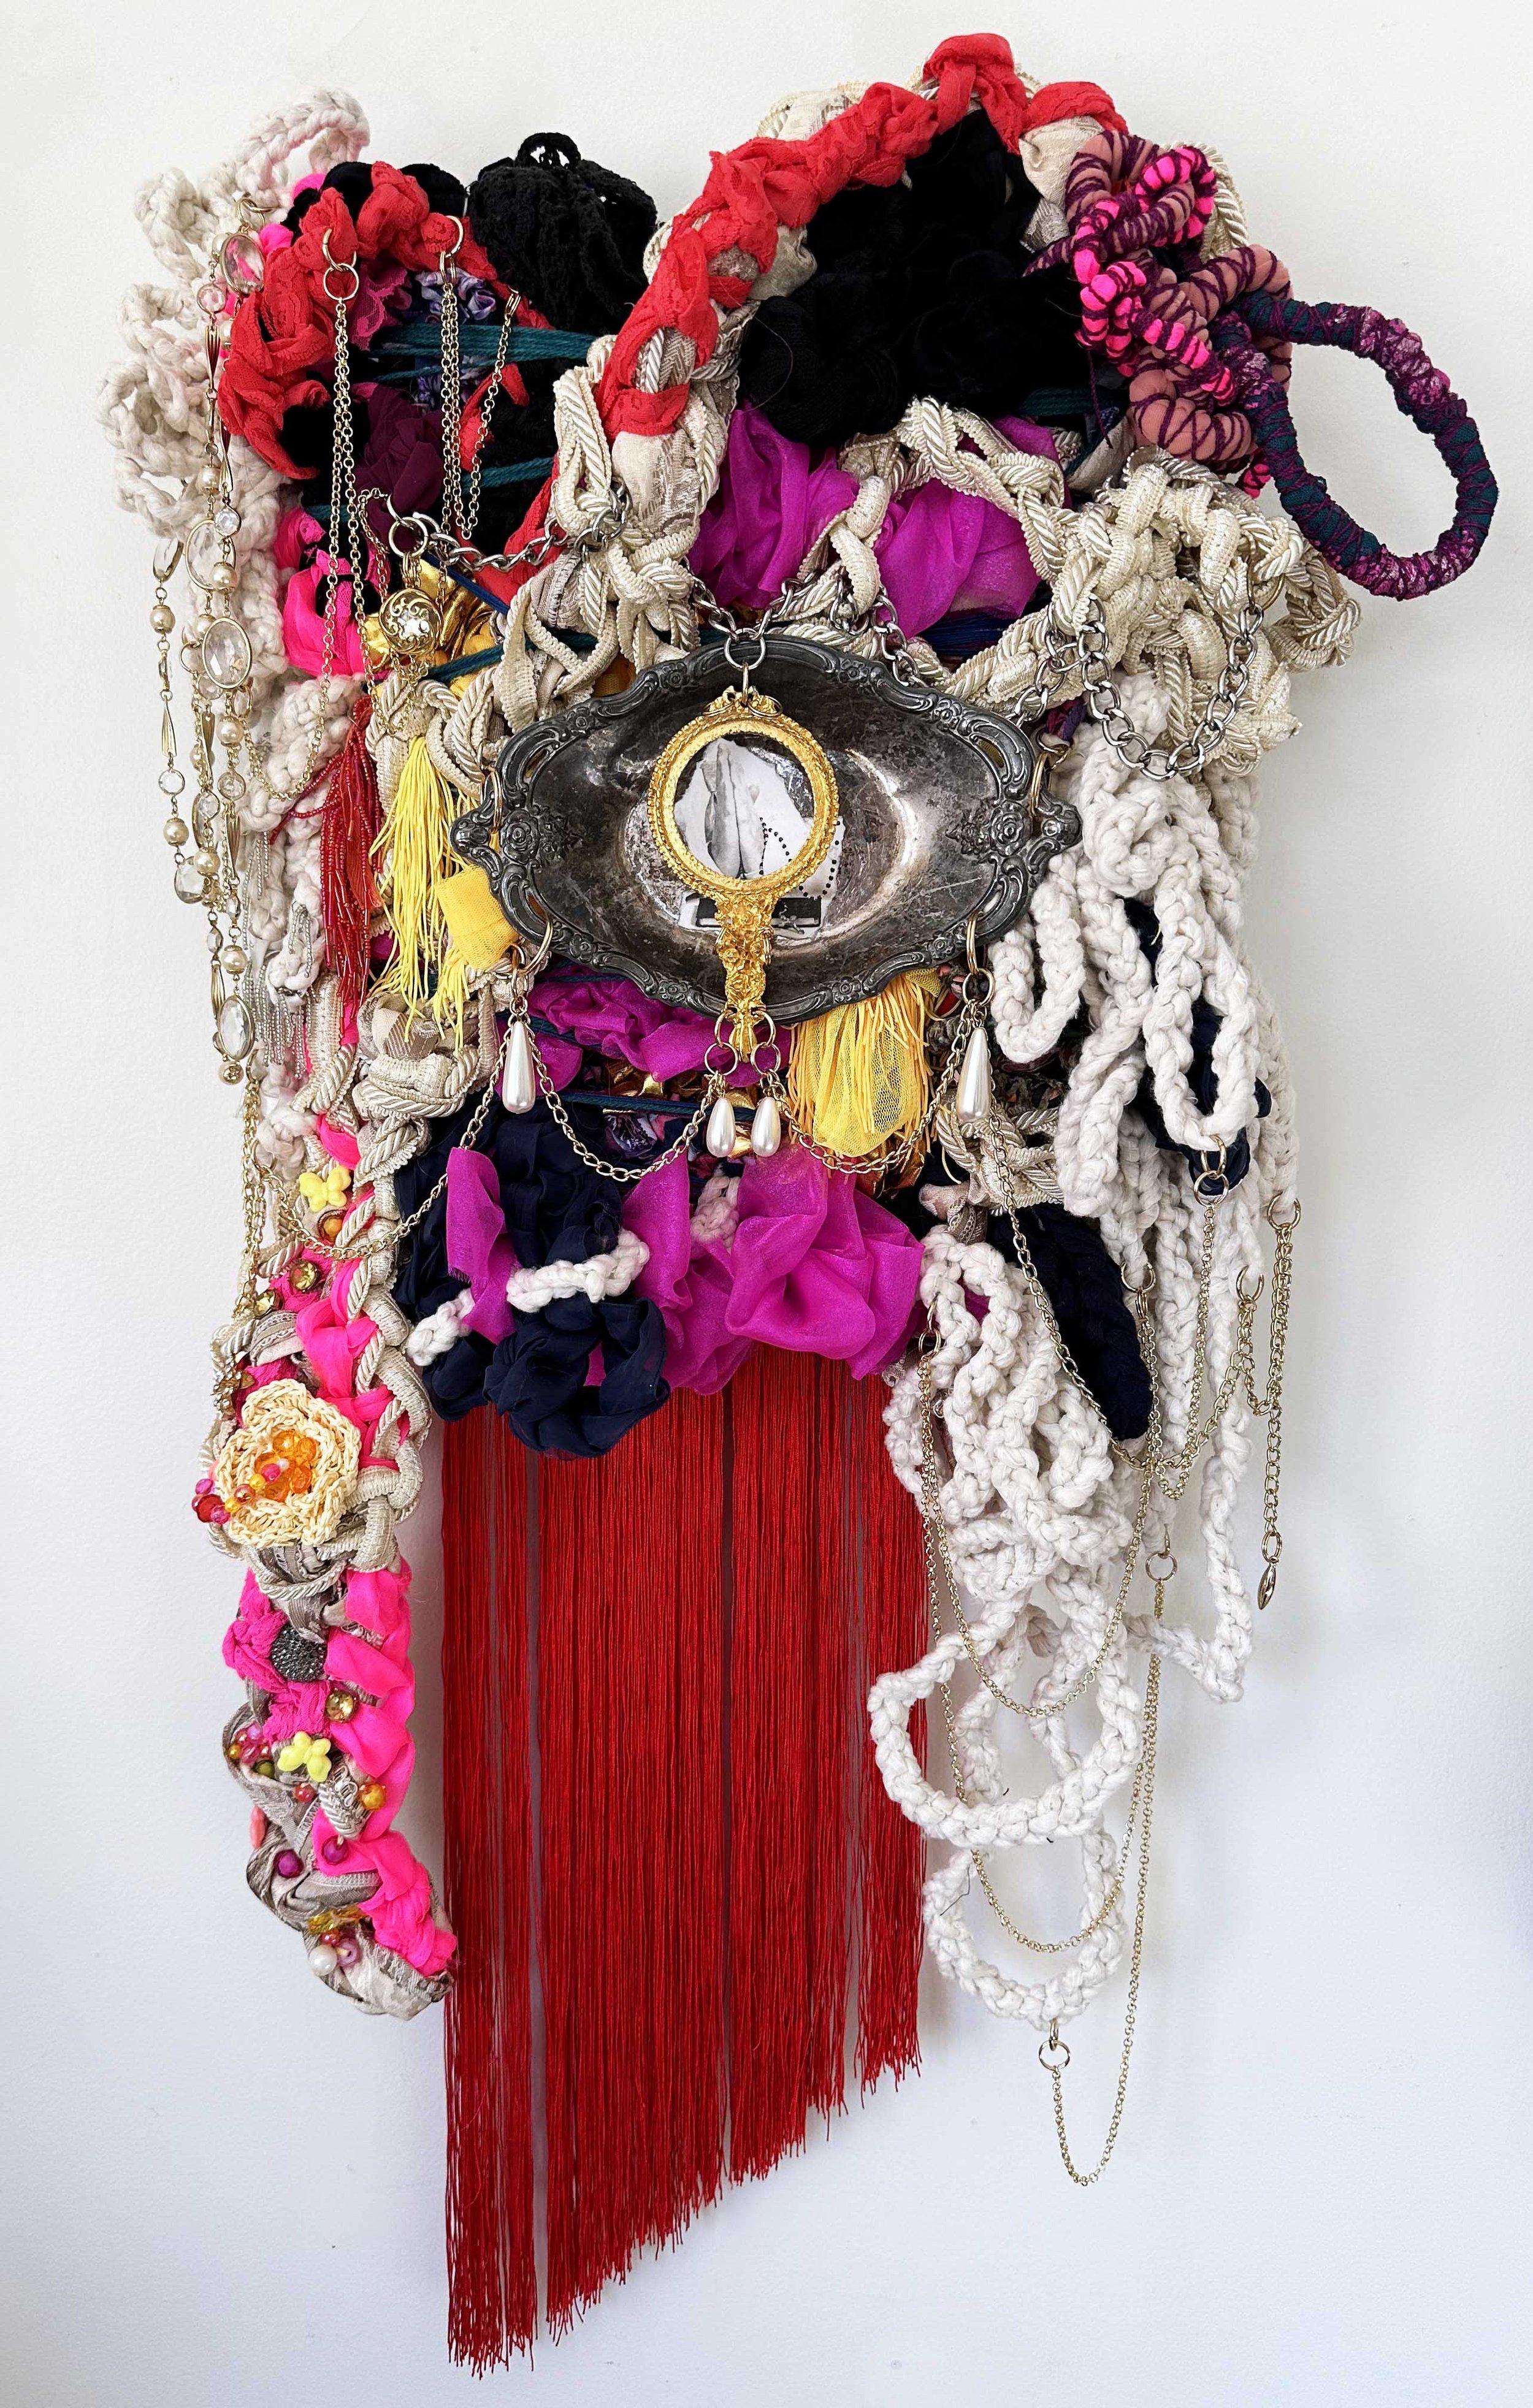 BrianAndrewWhiteley_Celtic Hands_Fabric, trimmings, chains, beads, collage, found objects  _21” x 37” _2024_StephanieMcGovern.jpg